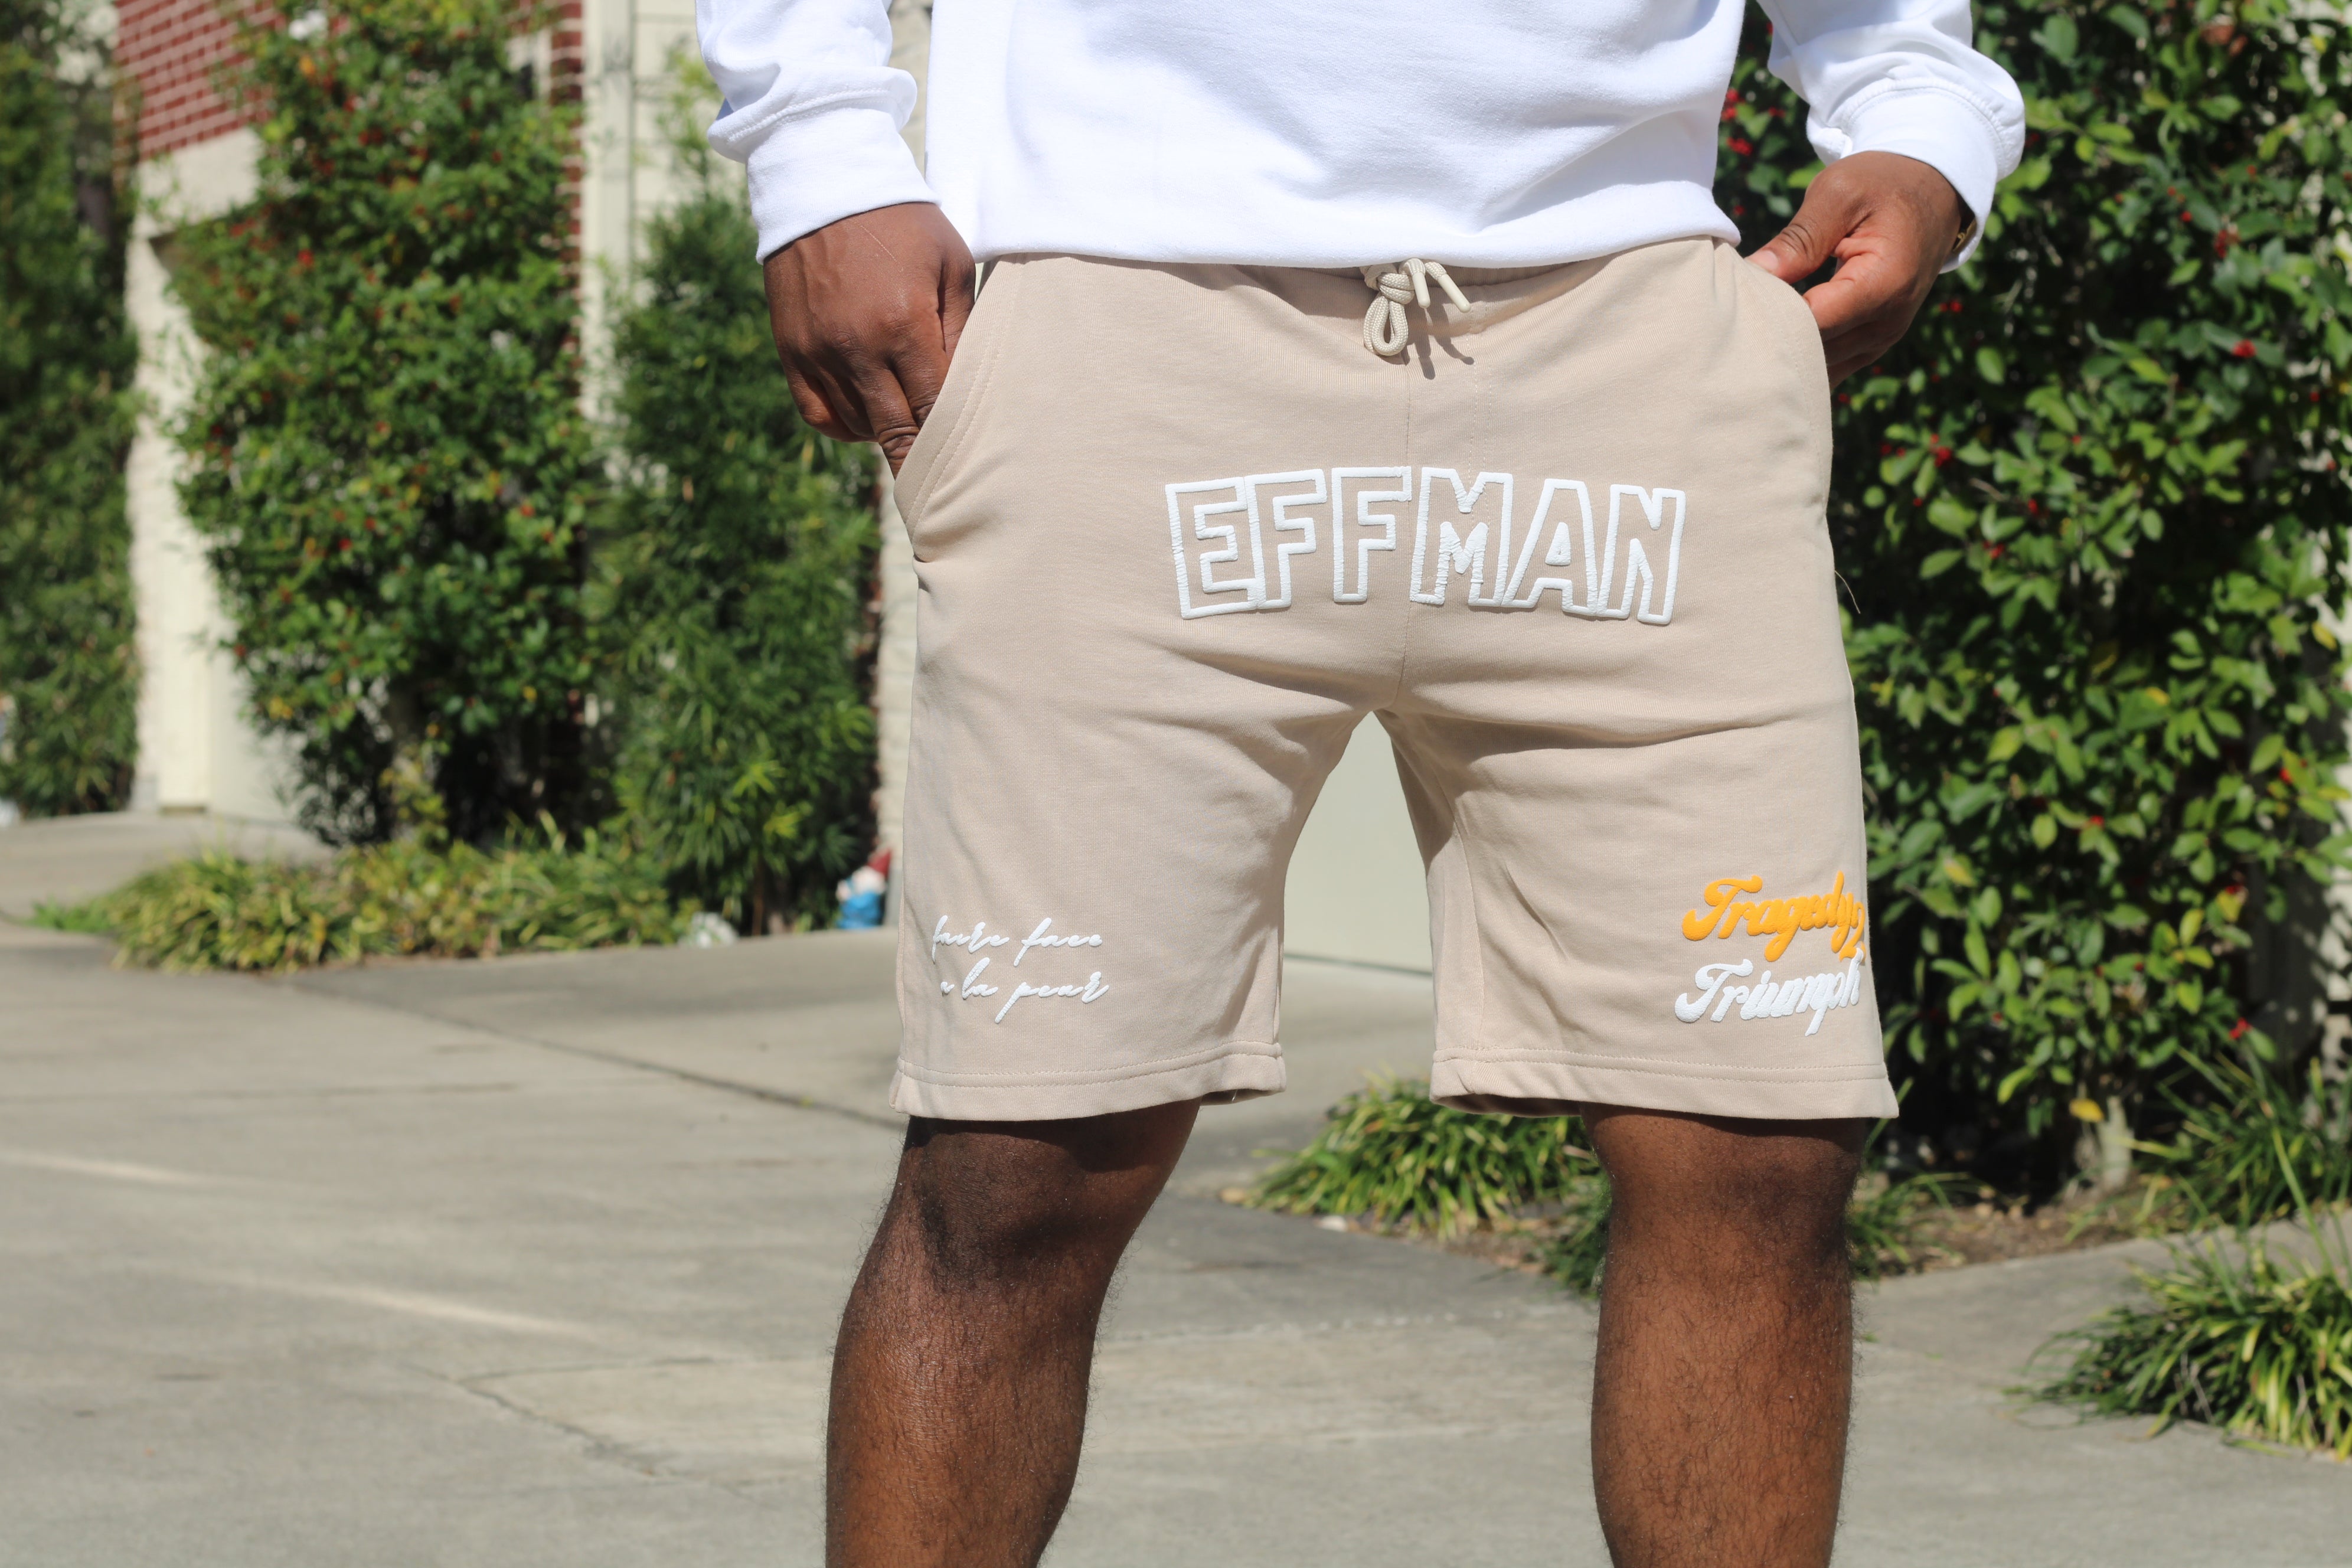 EFFMAN – 2 (Nude) Tragedy Triumph Collection Shorts